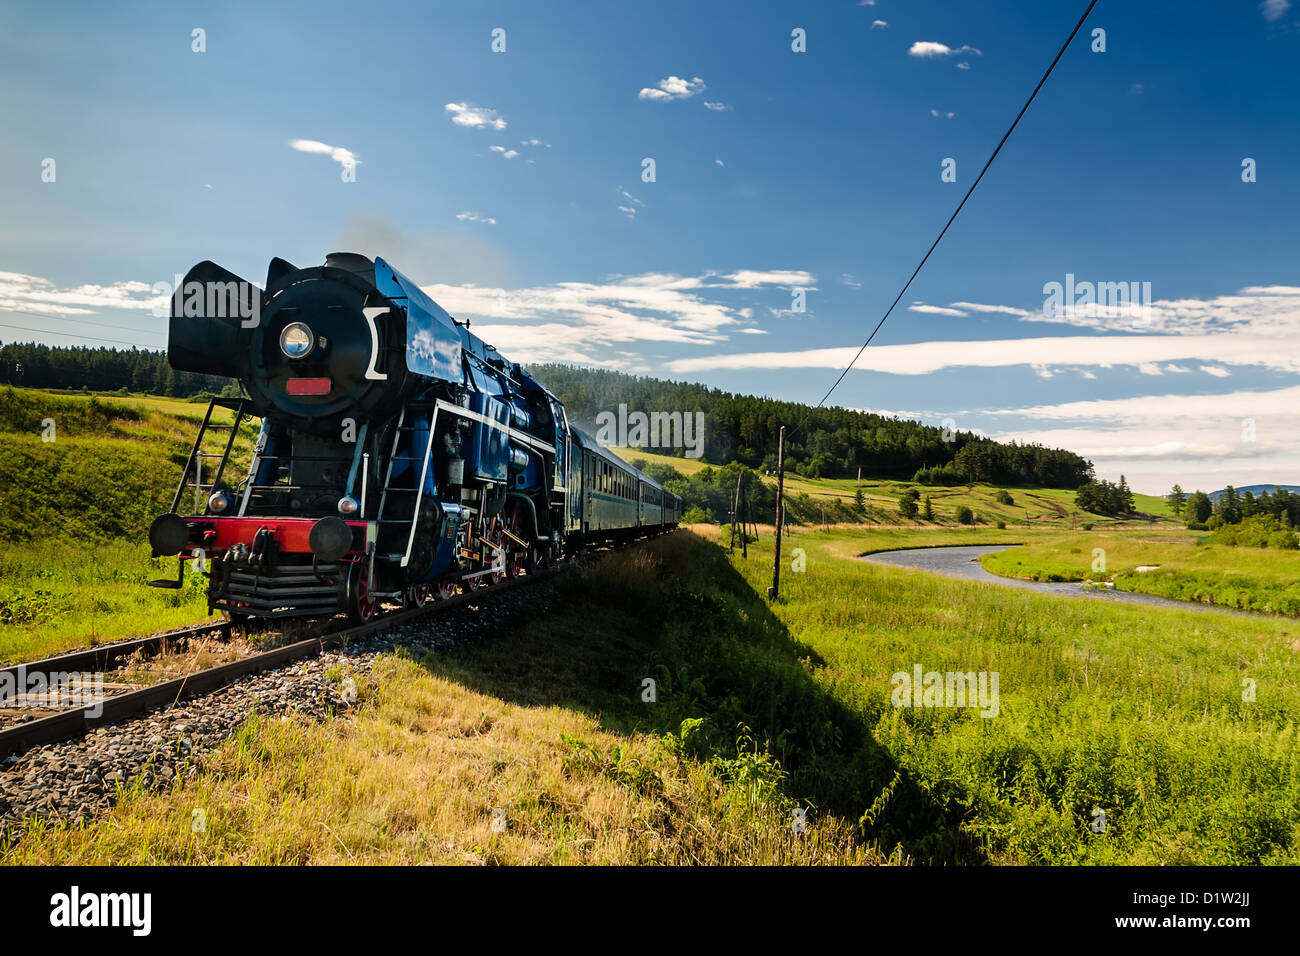 Steam engine locomotive train moving next to the river Stock Photo